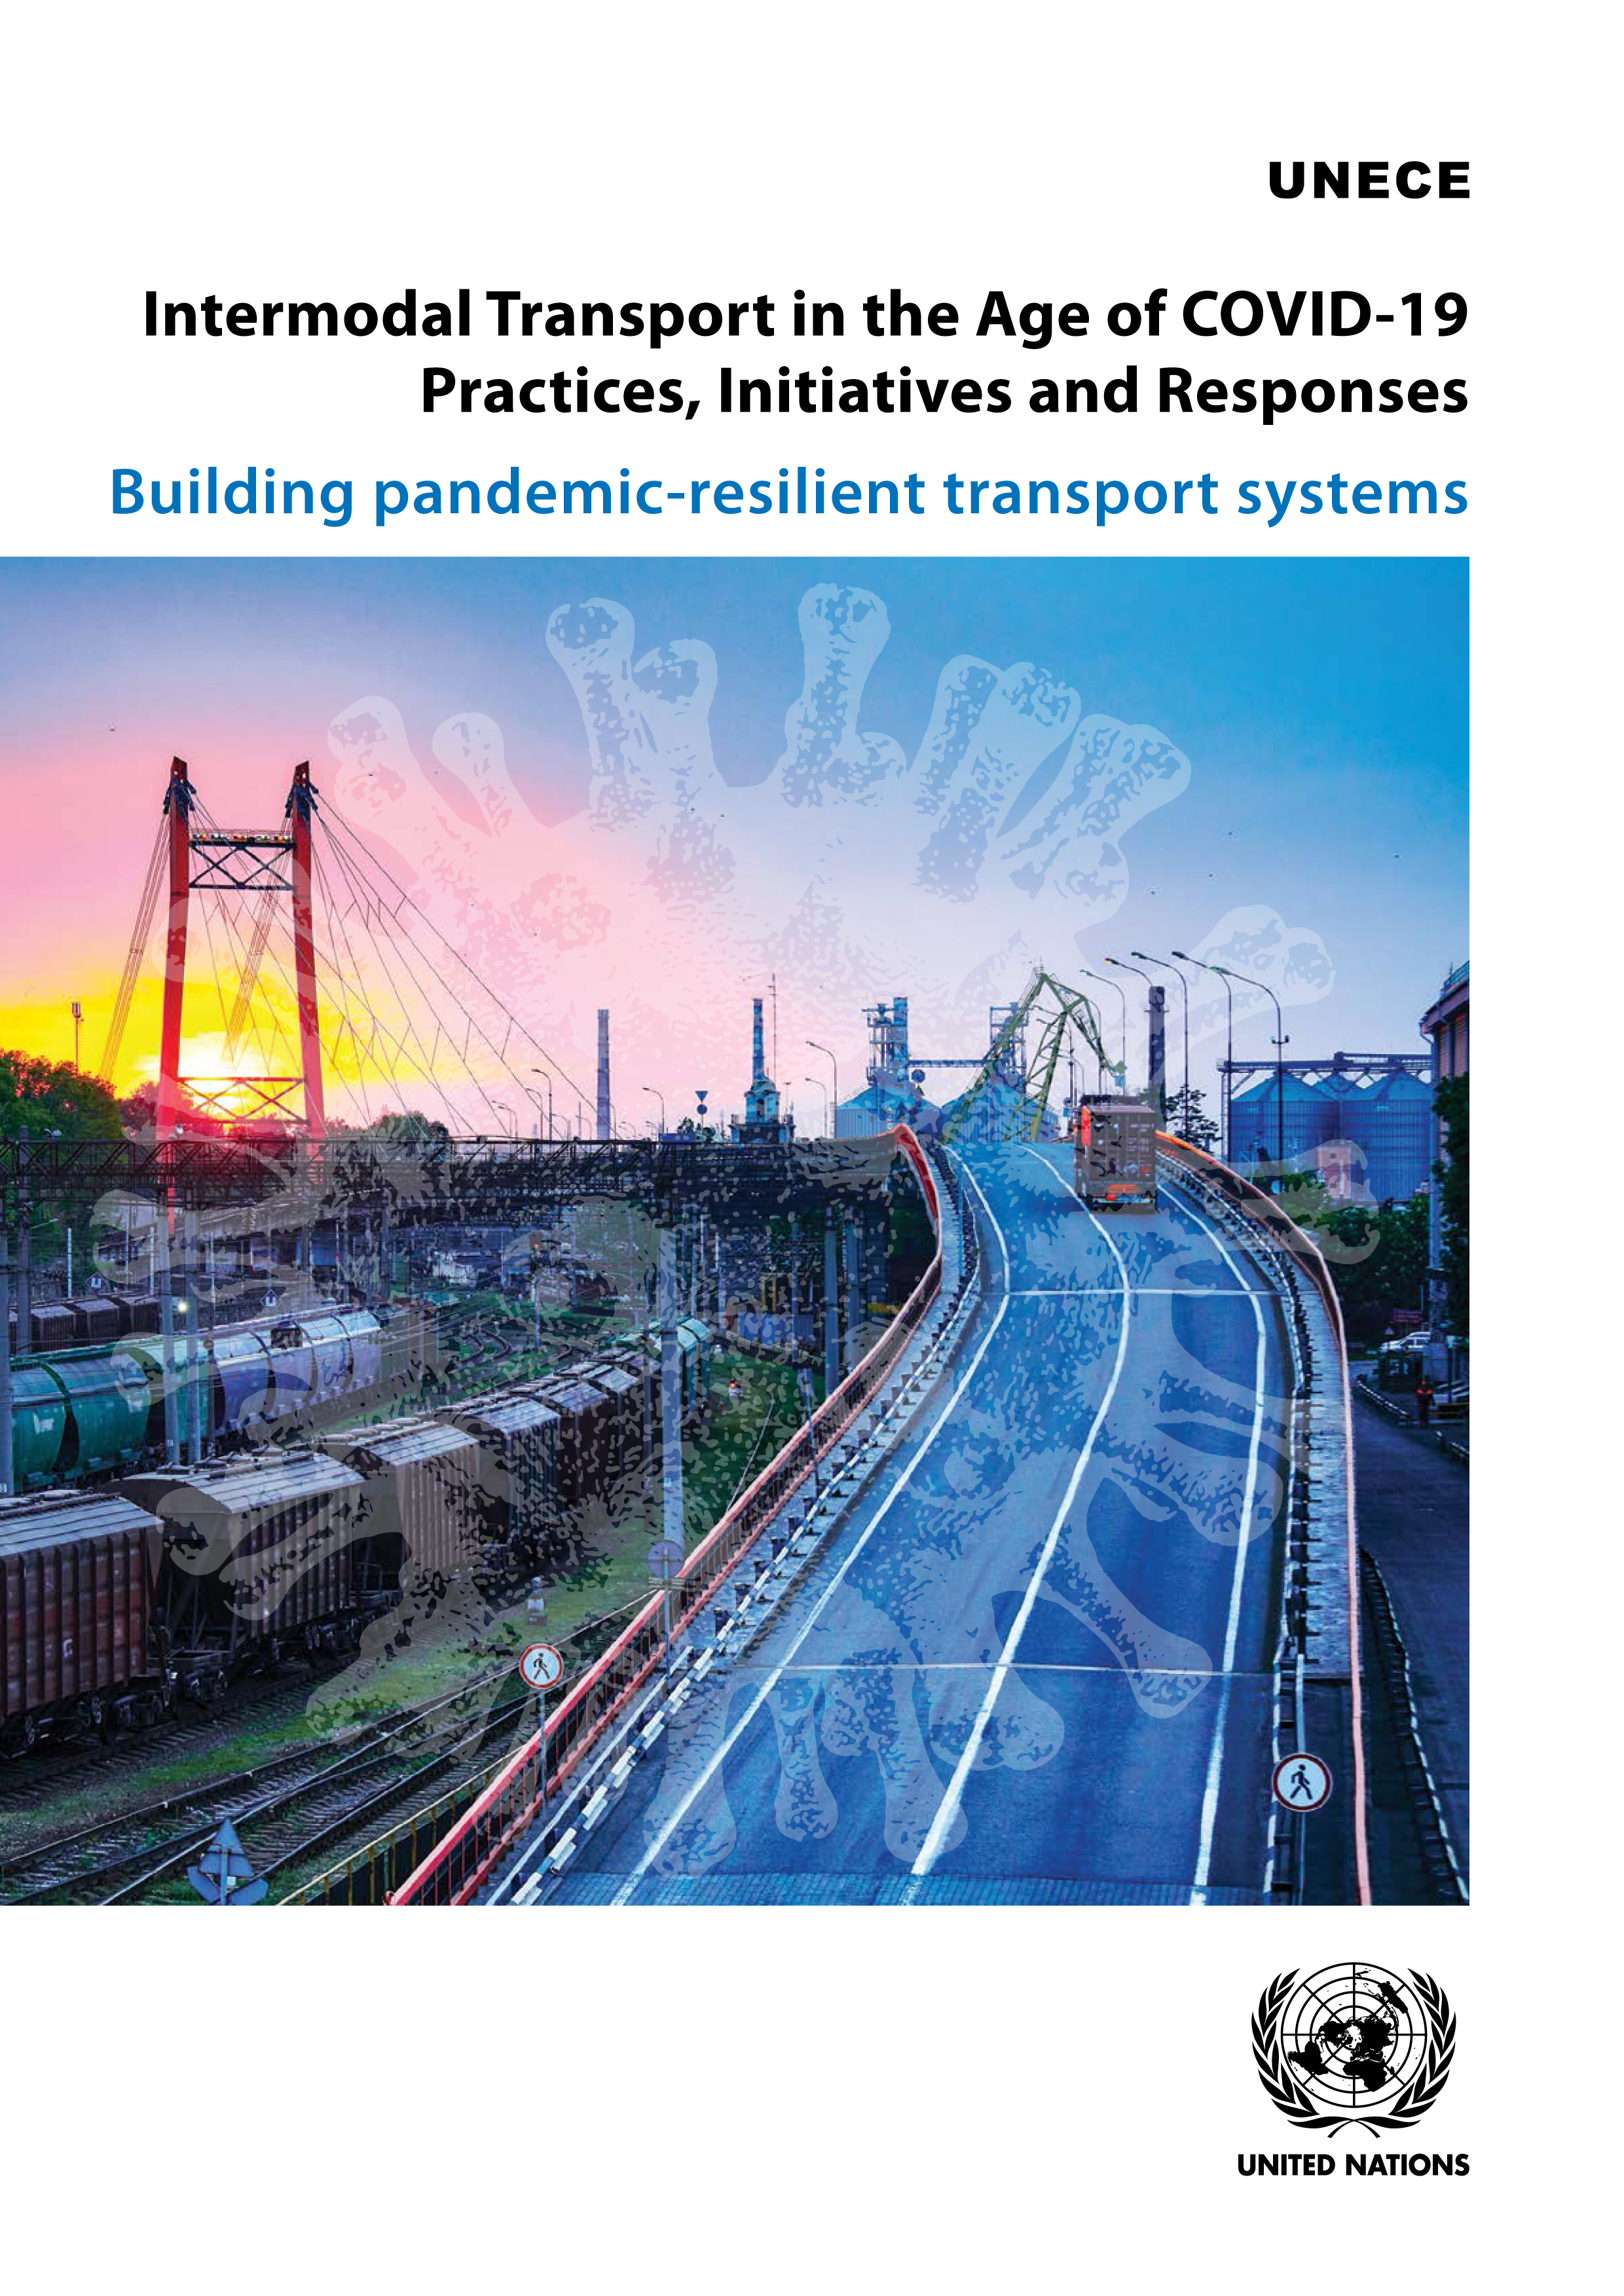 image of UNECE sustainable transport division – immediate responses